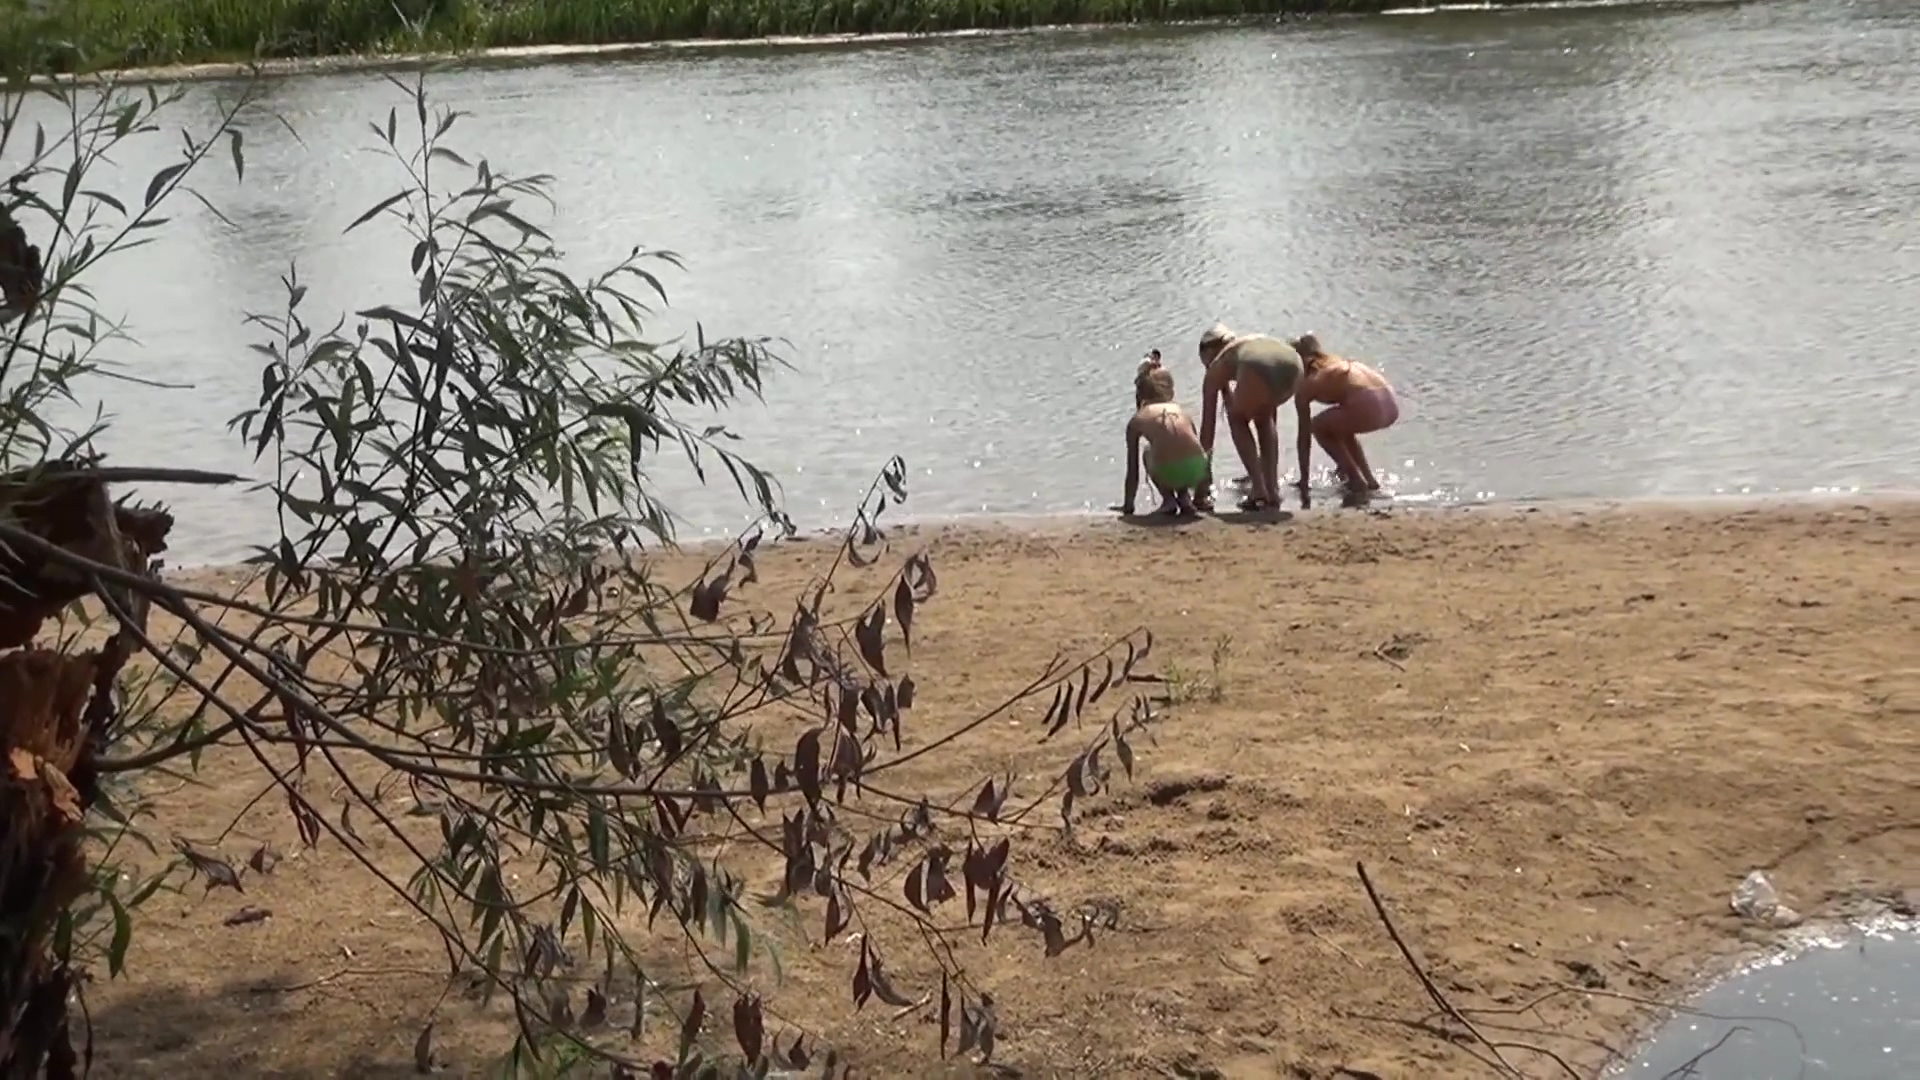 Children and the river_1080p.mp4